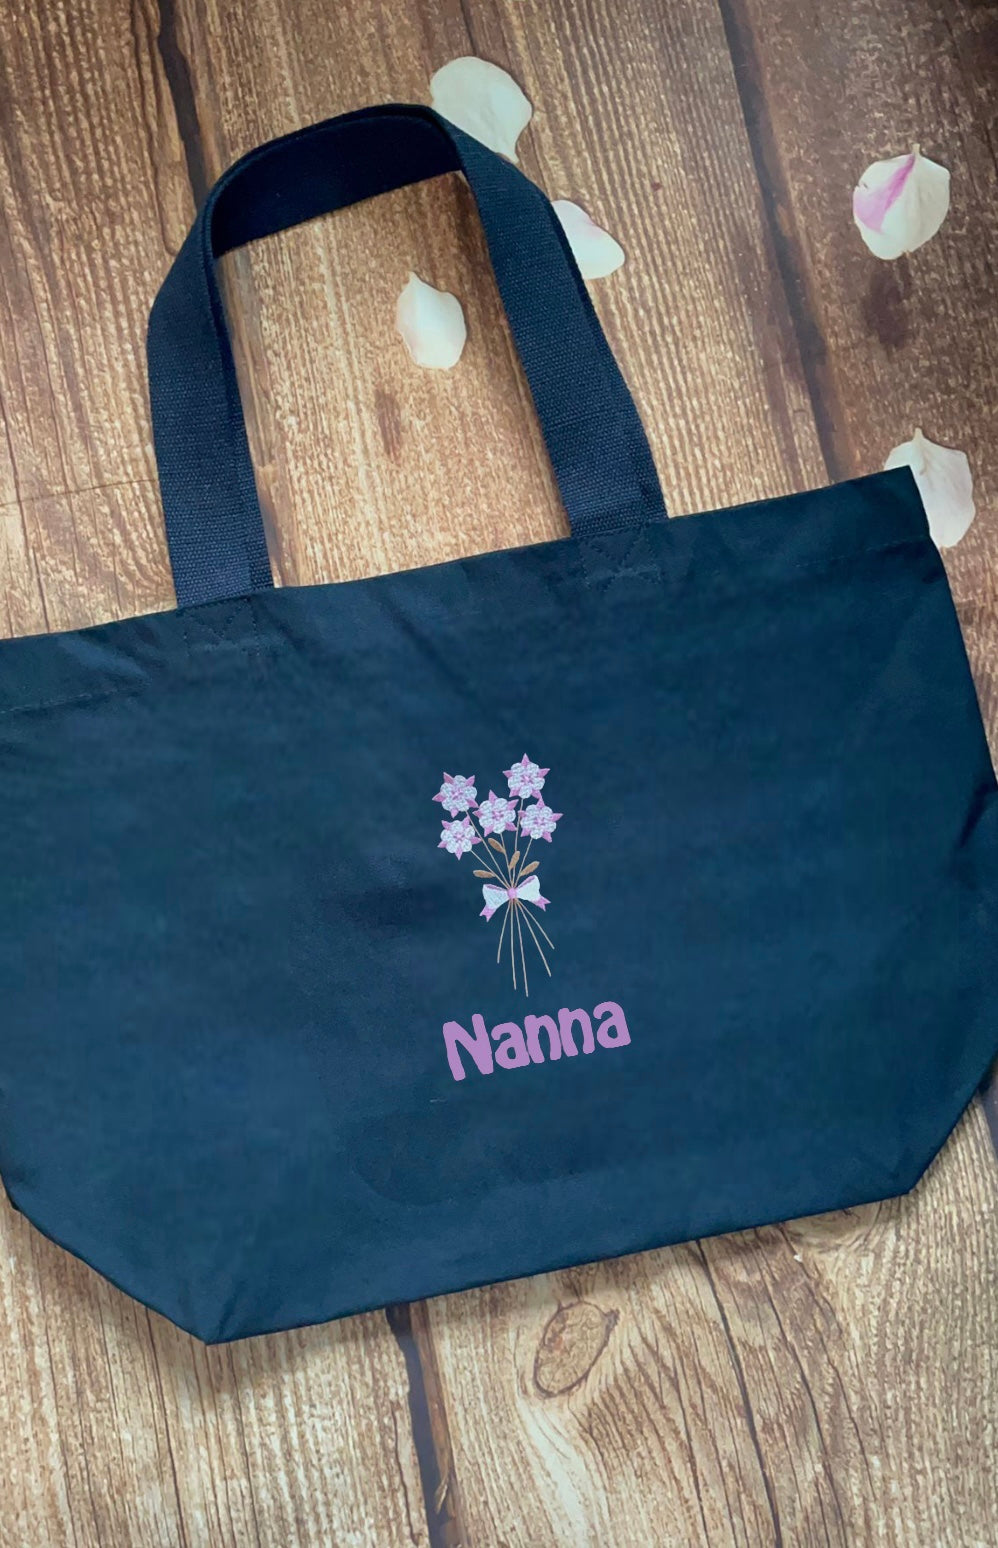 Embroidered flowers personalised canvas tote bag / Mothers Day present /birthday. Choice of flowers, perfect for Mum, Nanny / Granny